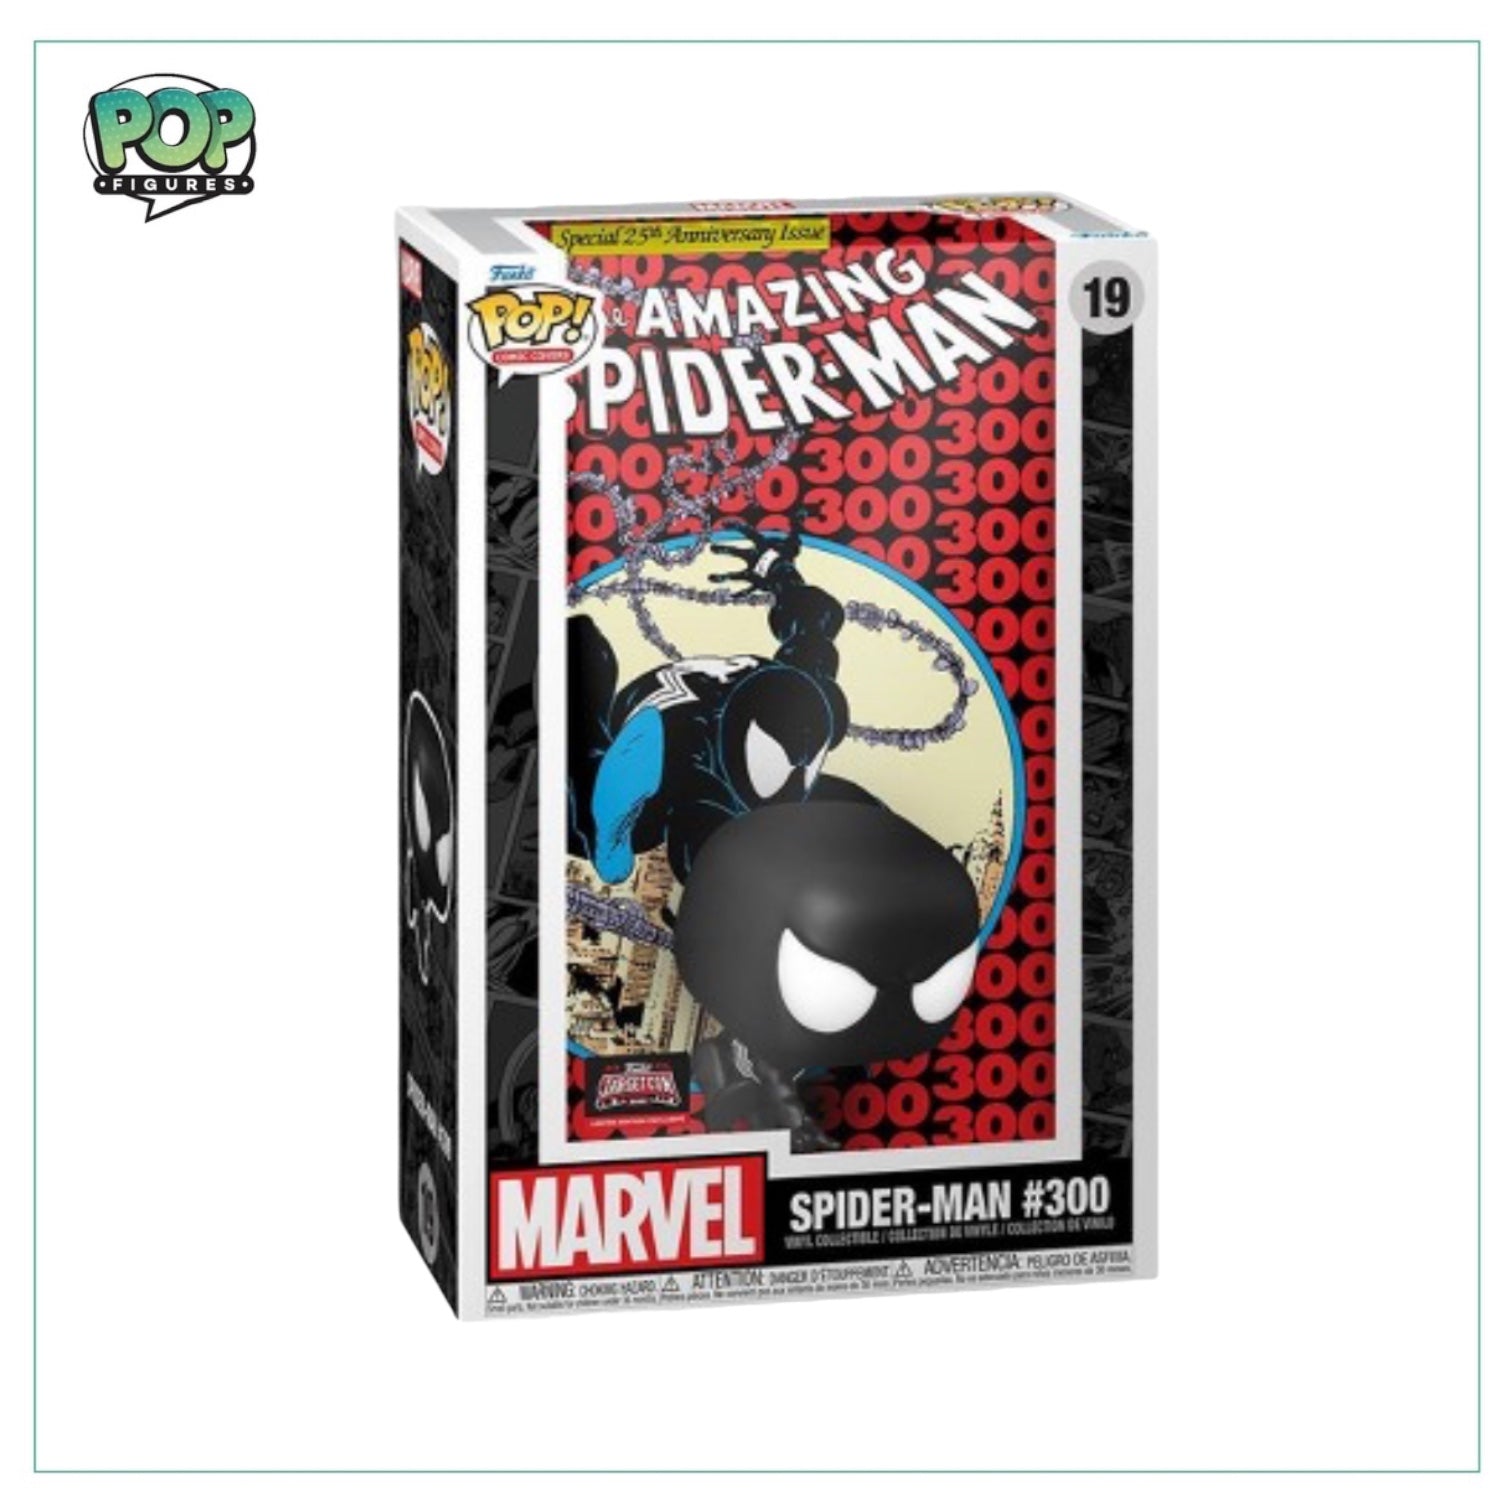 Spider-Man #300 #19 Funko Pop Comic Cover! - Marvel - Target Con 2023 Exclusive